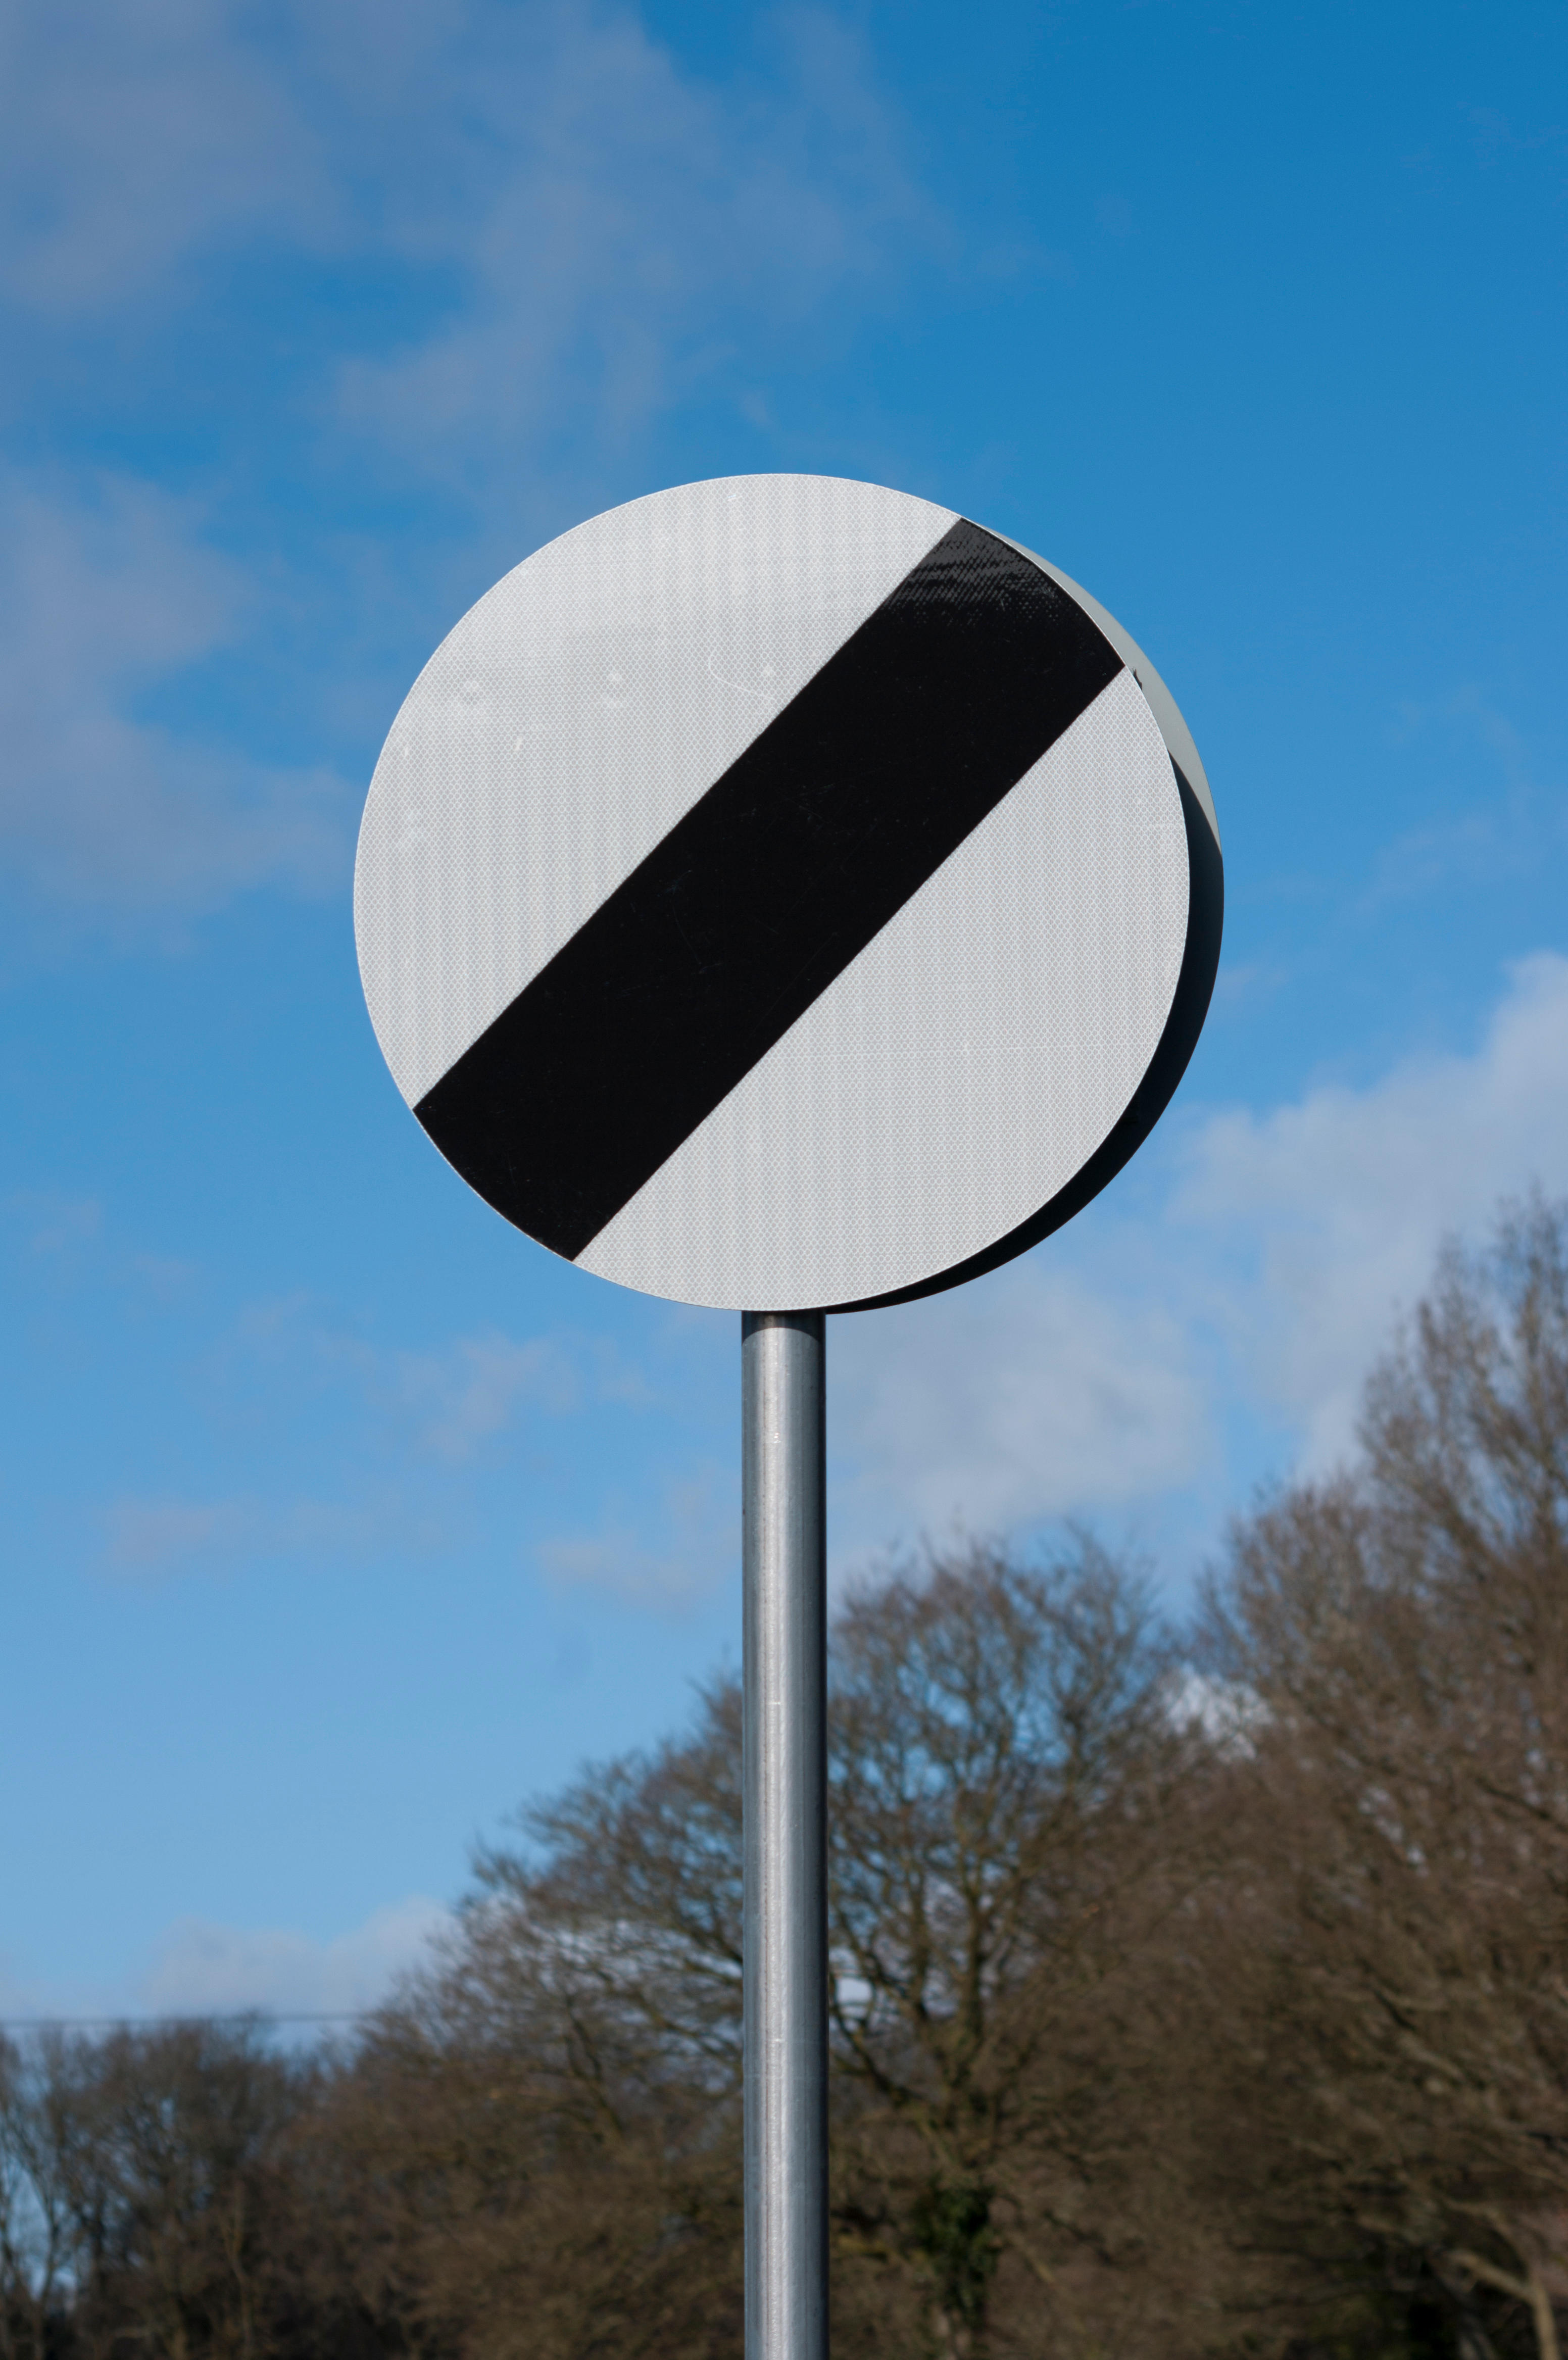 Tourist confused by UK road sign after driving around for weeks without knowing what it means